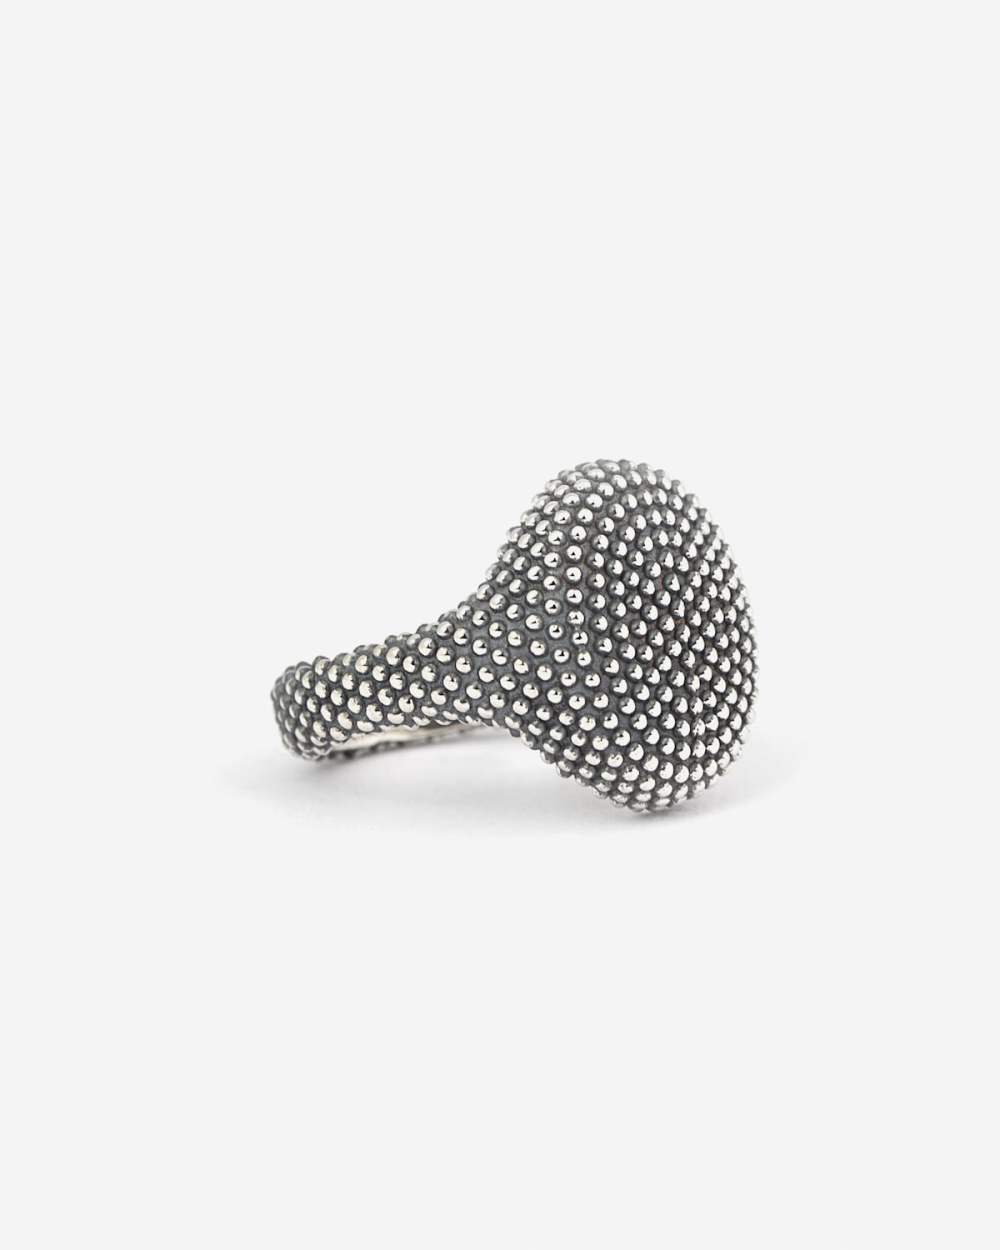 SMALL OVAL DOTTED SIGNET RING